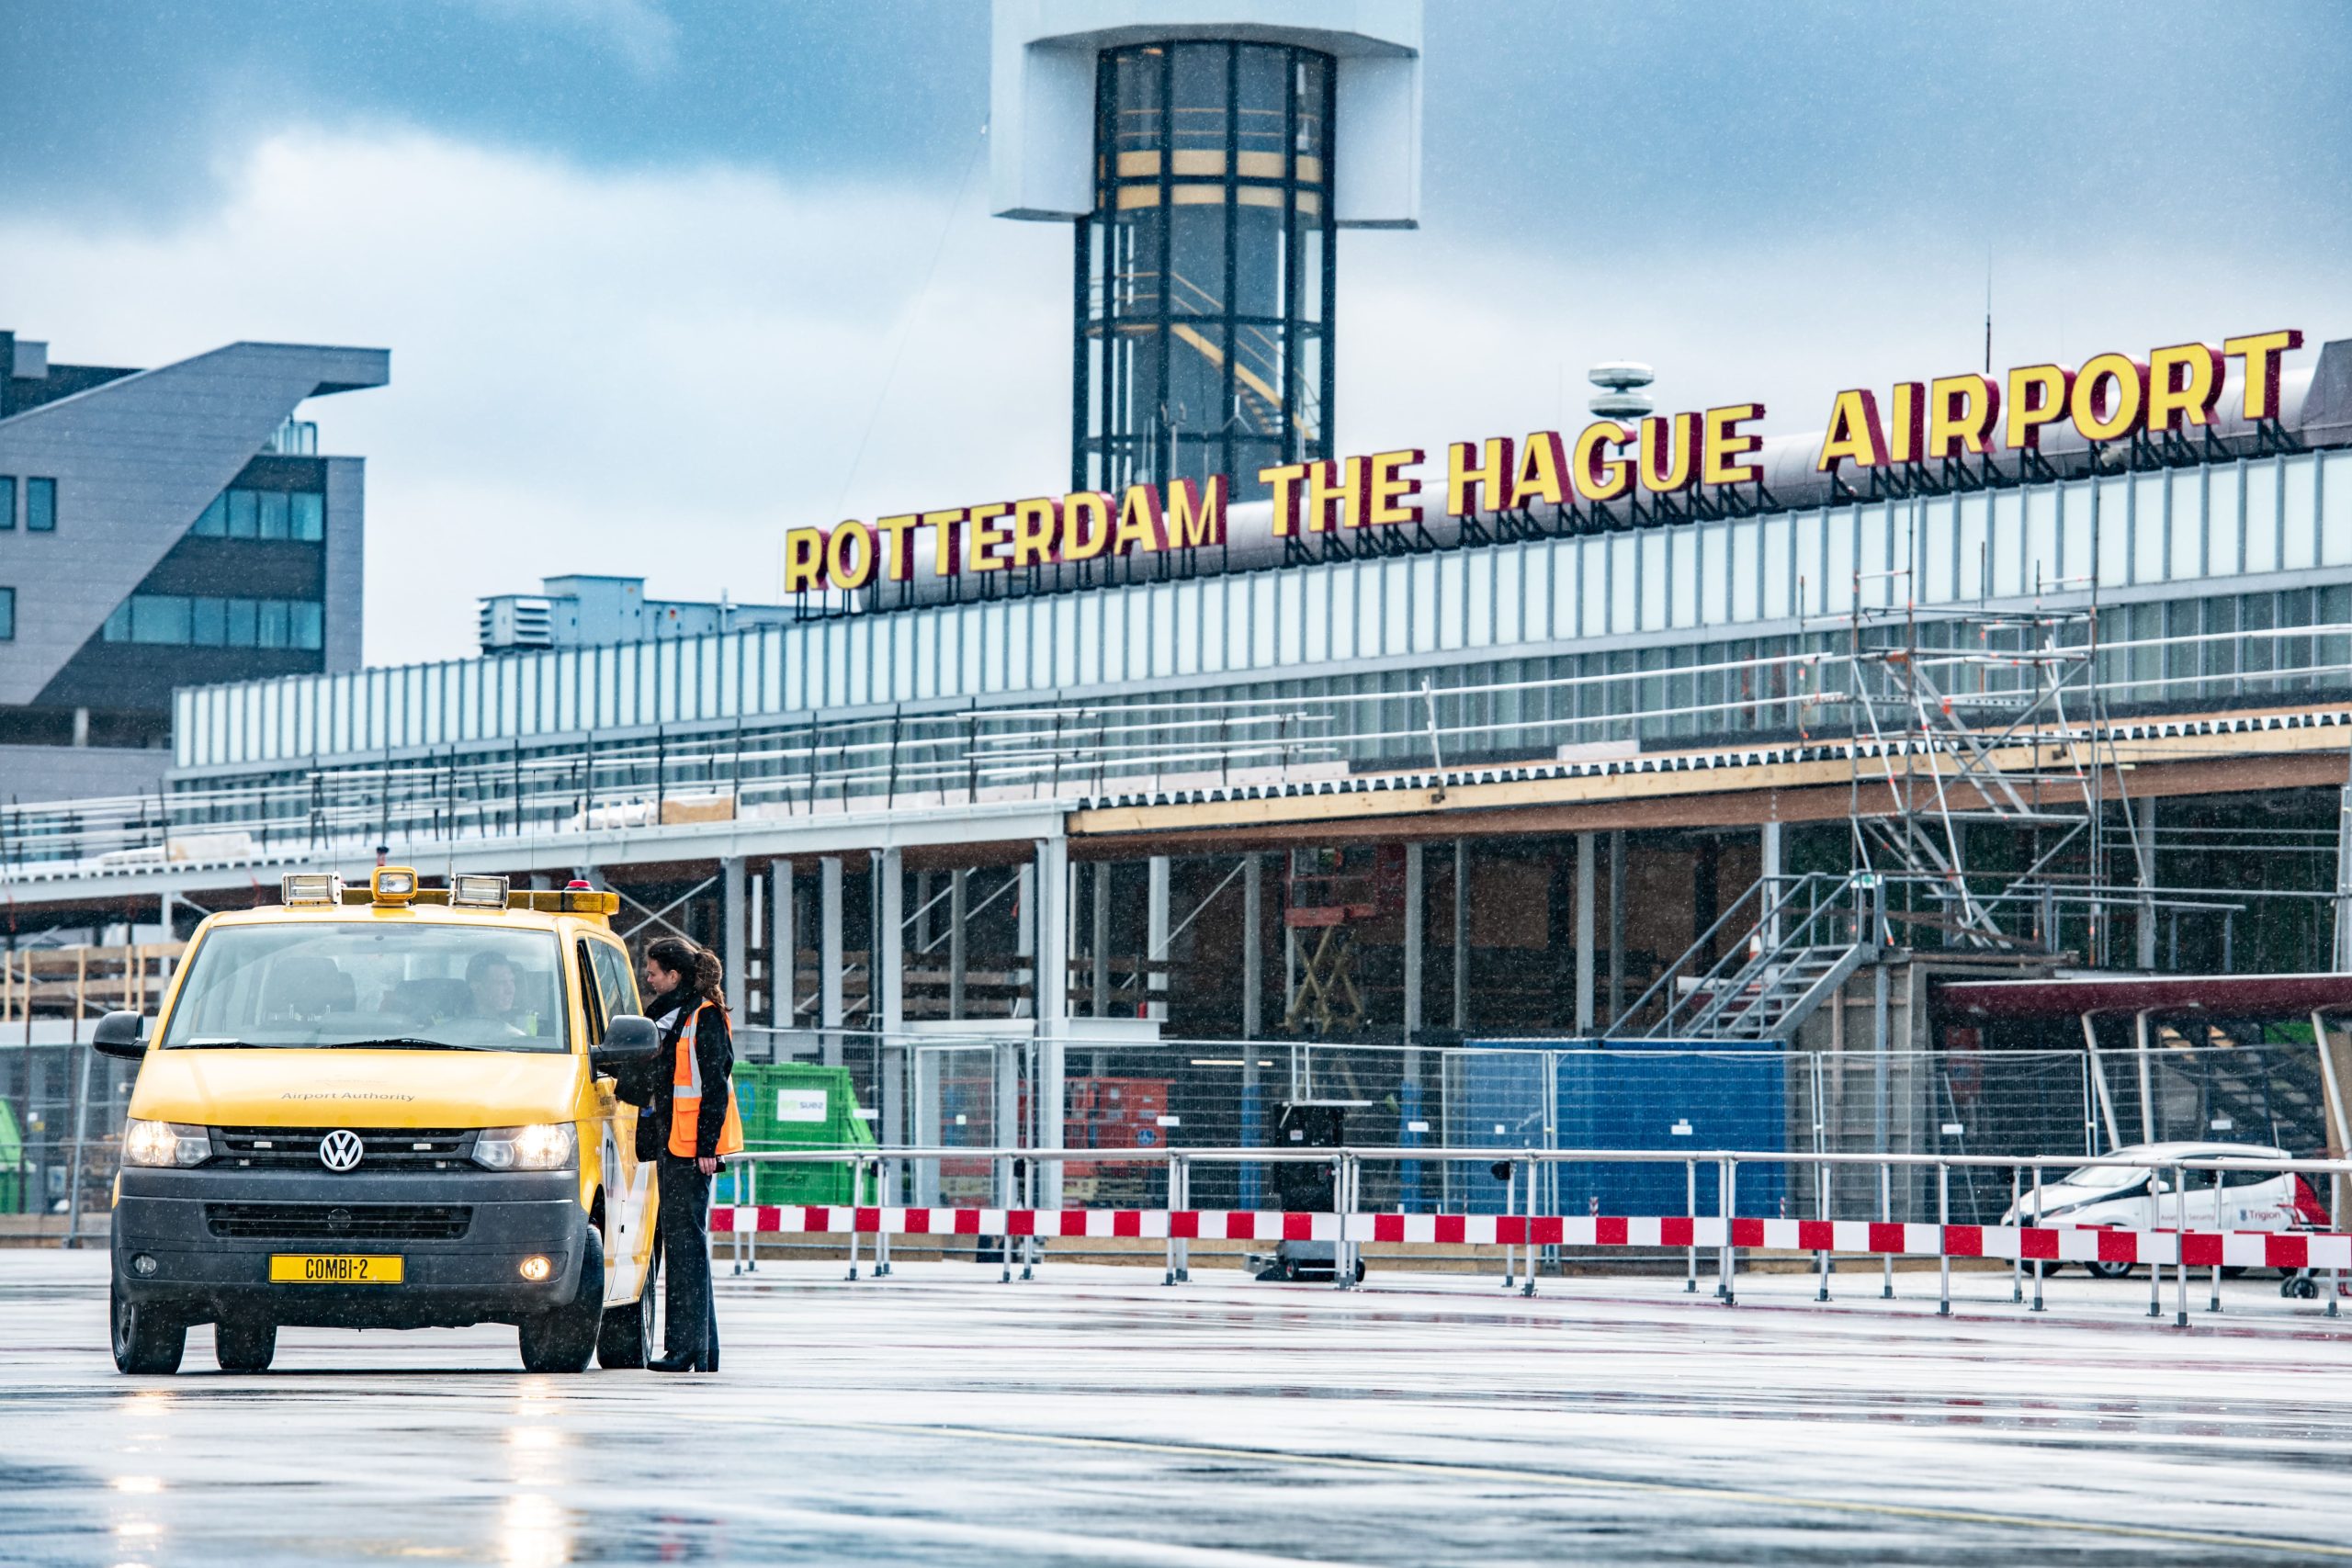 Compris assited Rotterdam The Hague Airport to build a solid asset management organization. Together with the assets & projects department, a strategic asset management plan was drawn up which was then translated into practical activities for each stakeholder.